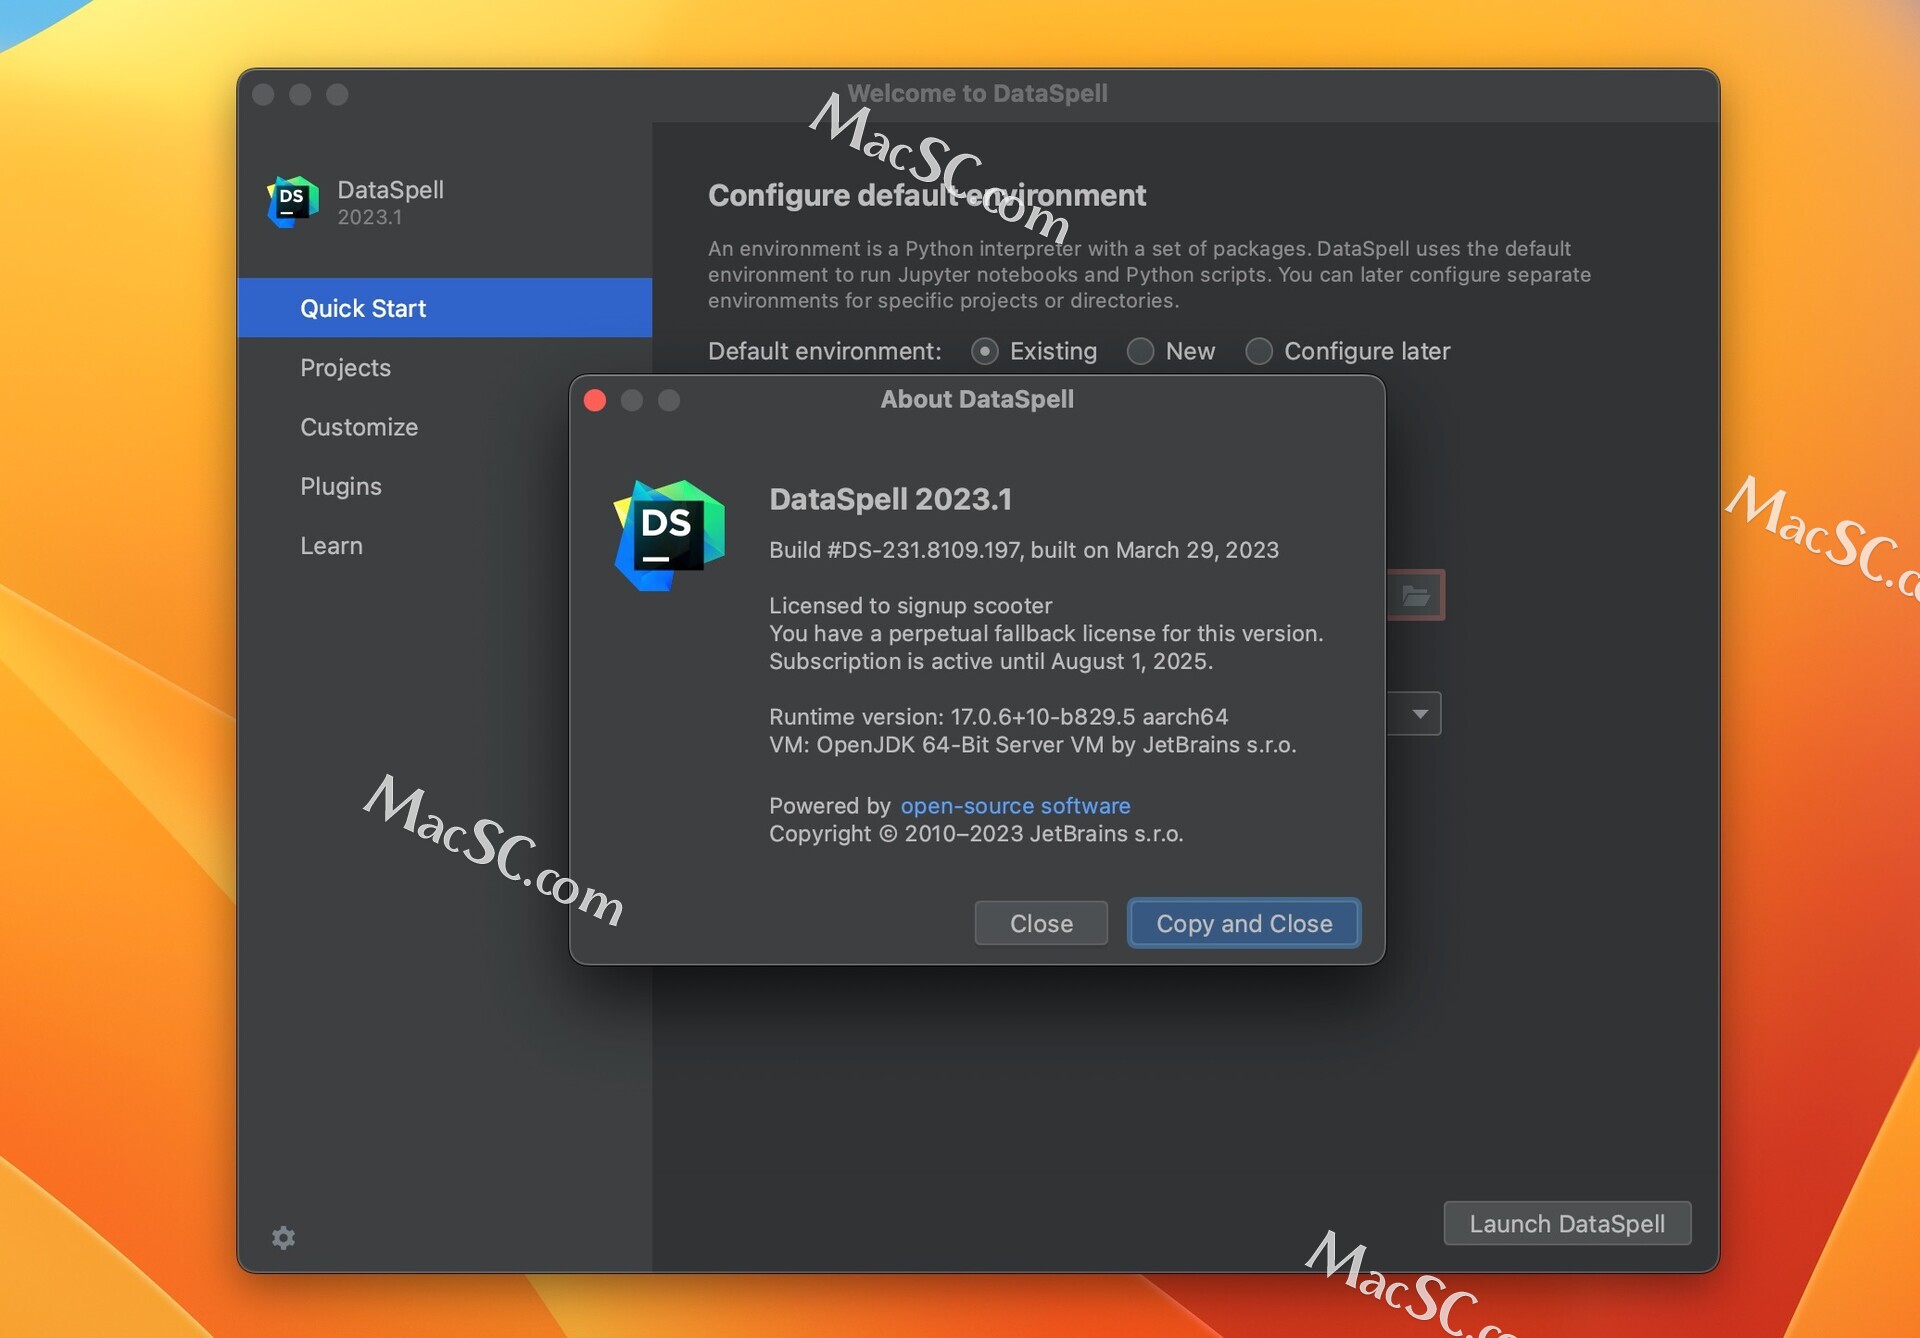 JetBrains DataSpell 2023.1.3 for windows download free